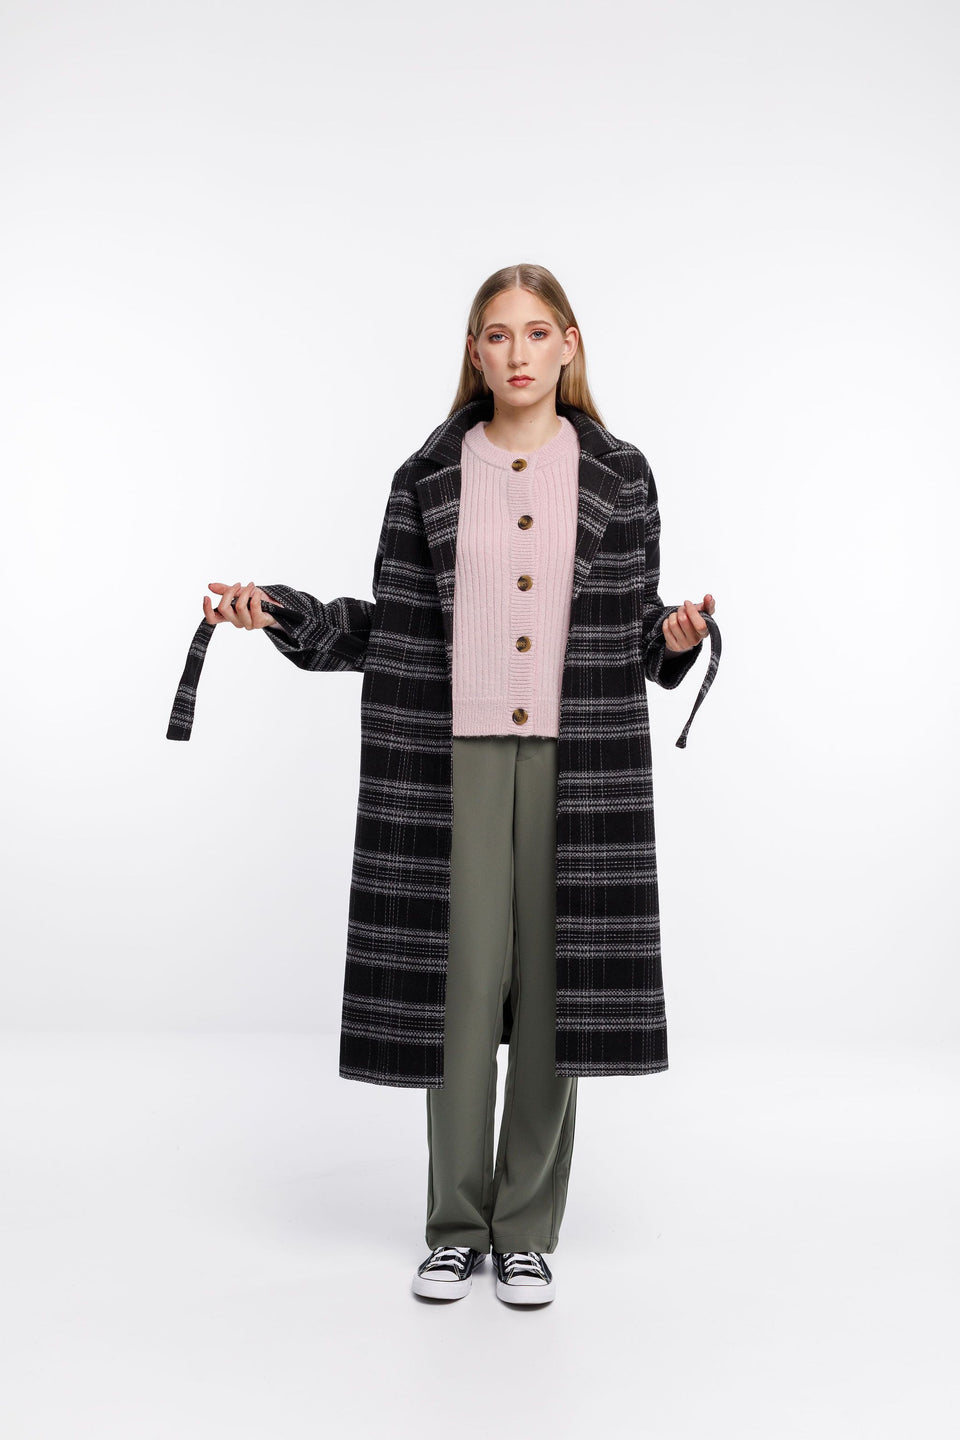 Thing Thing Clement Coat Black Check